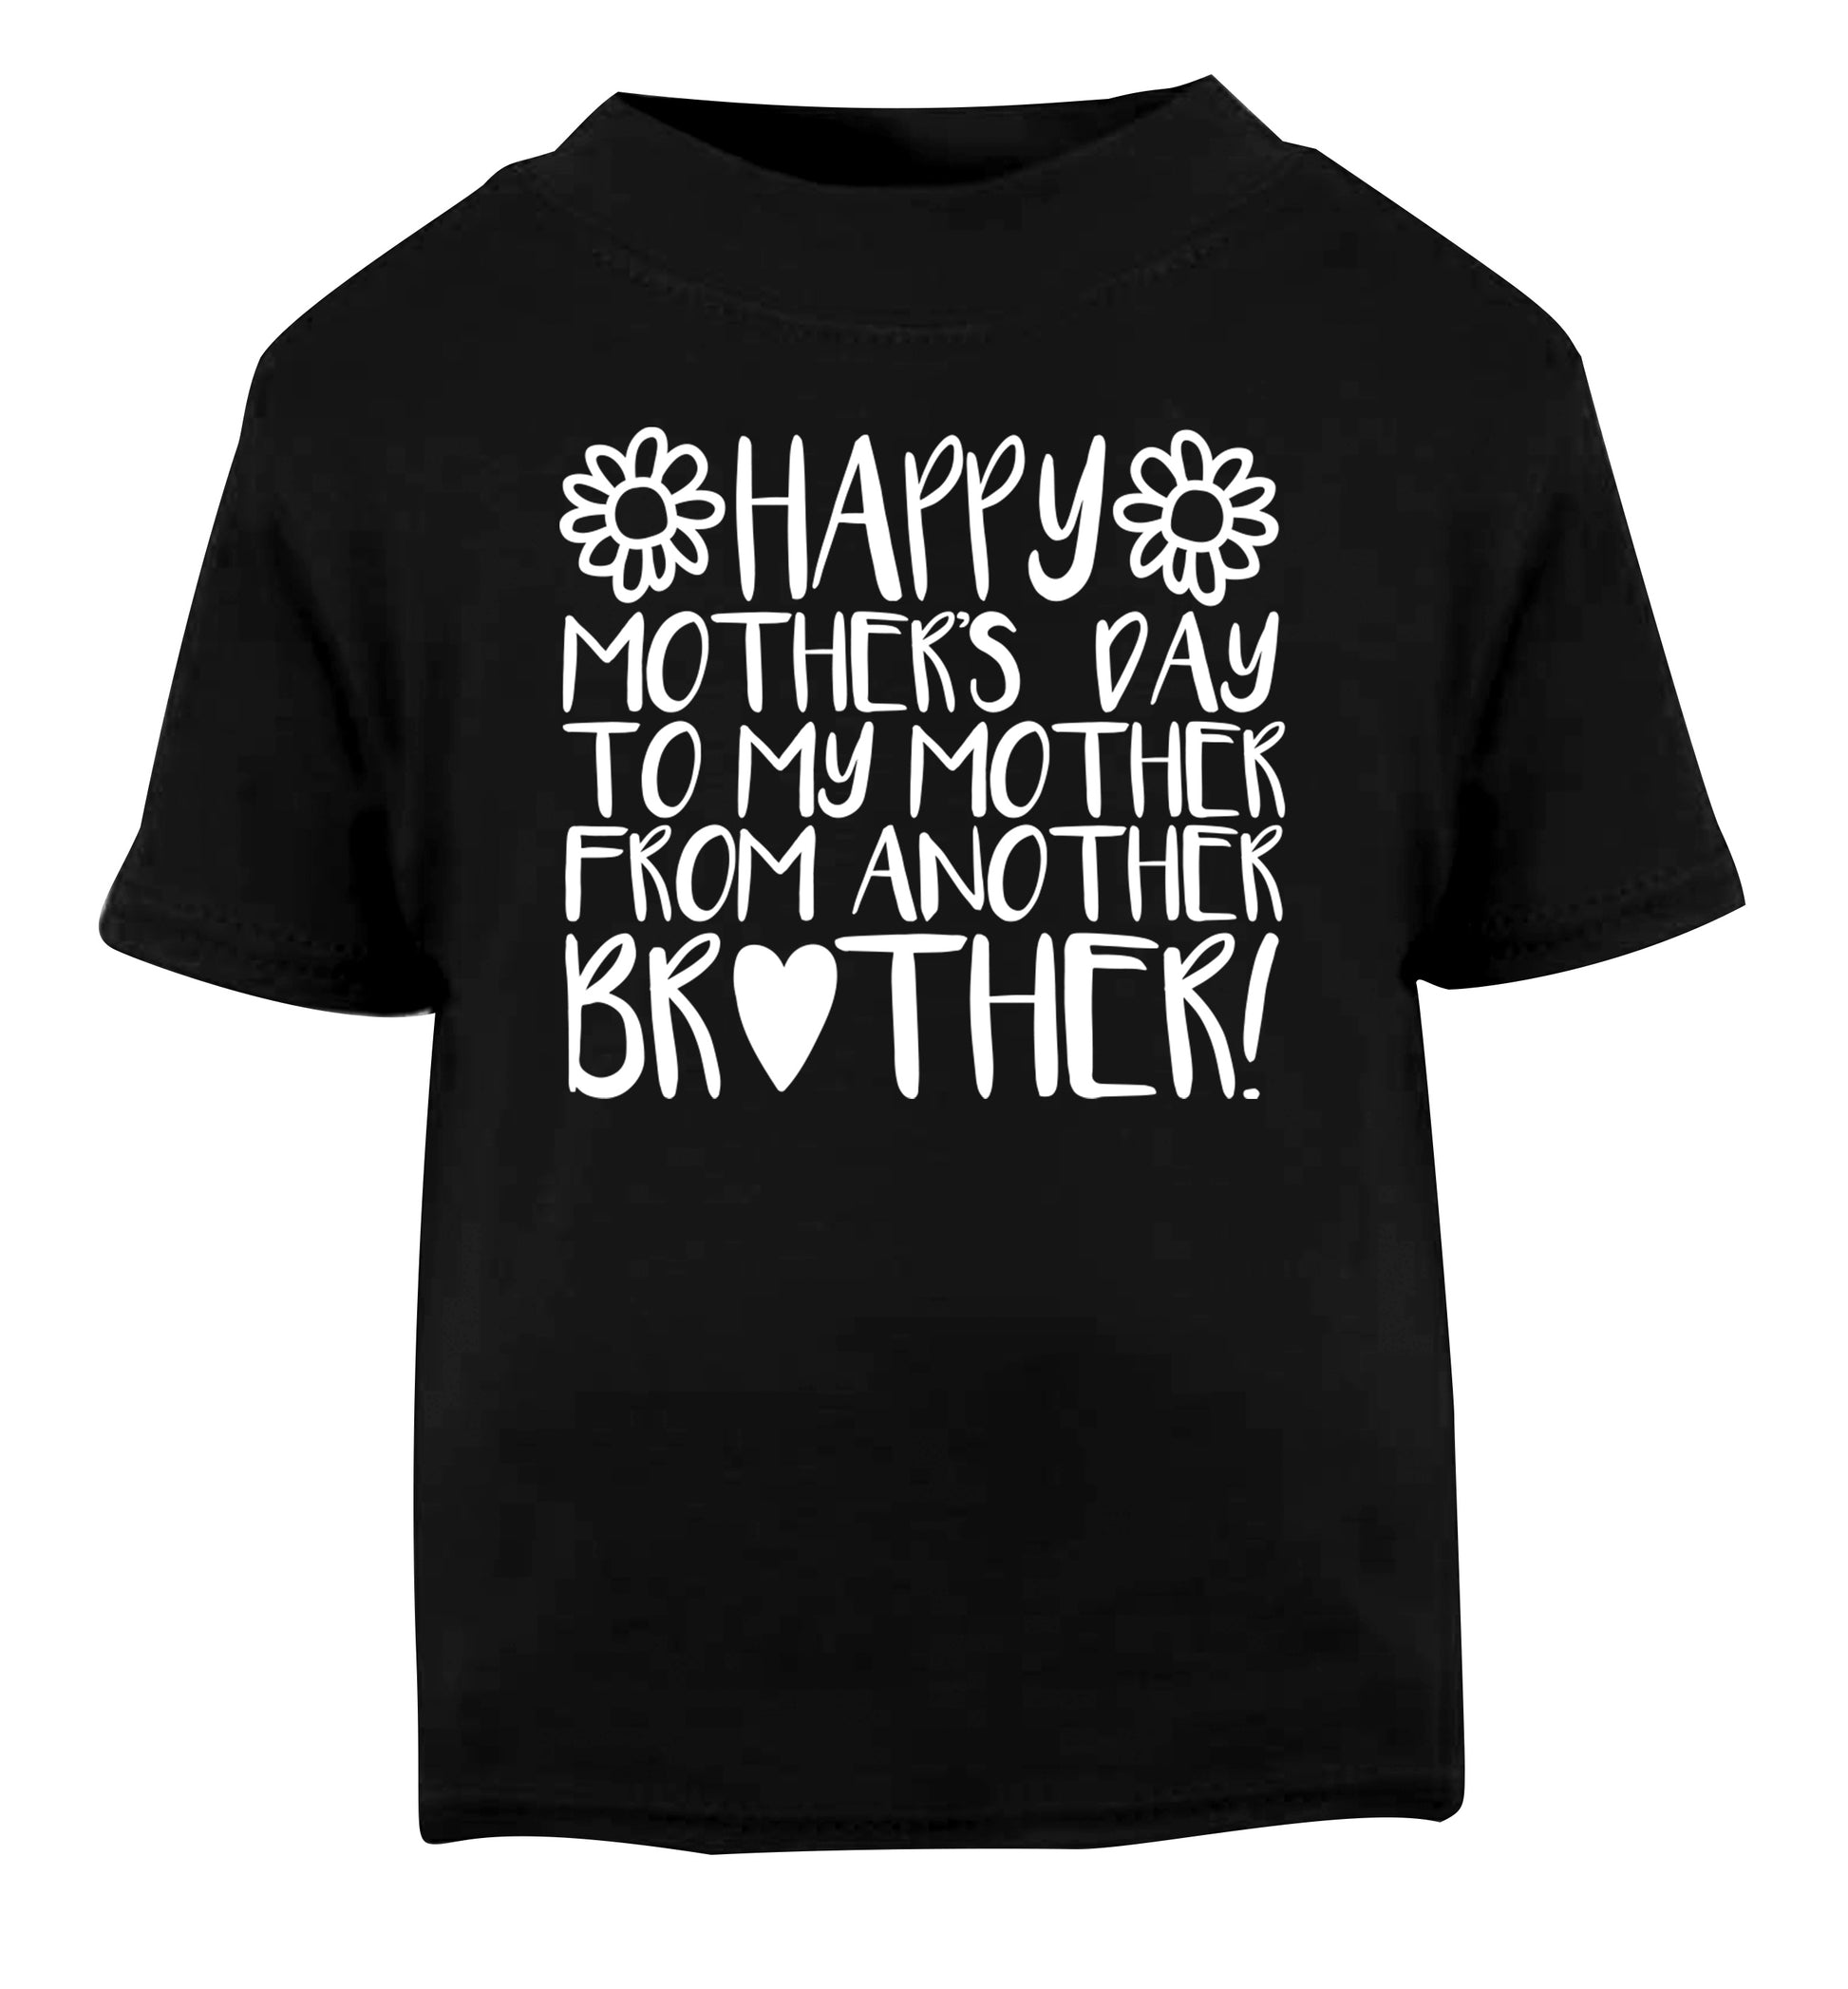 Happy mother's day to my mother from another brother Black Baby Toddler Tshirt 2 years